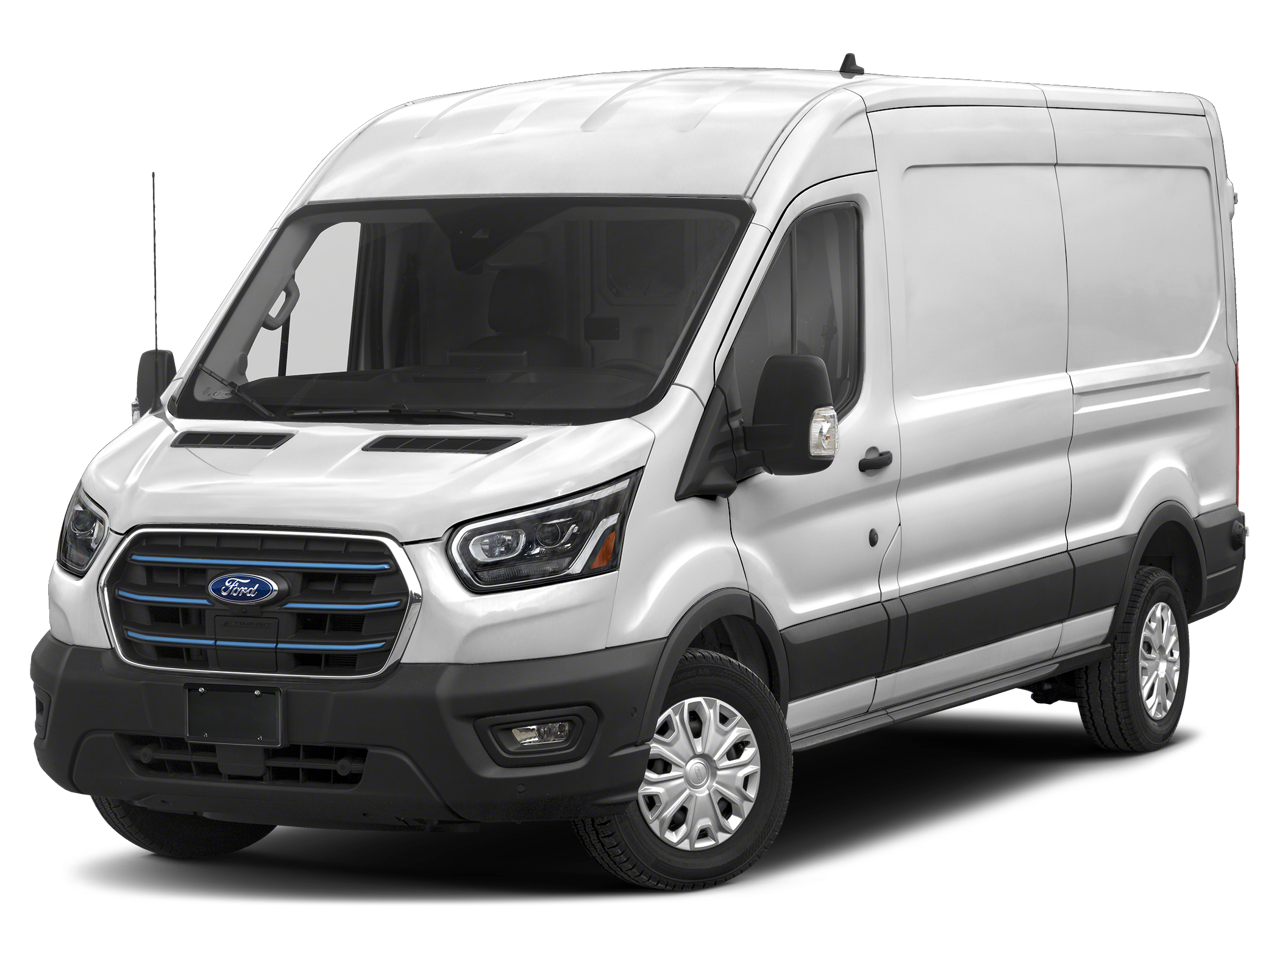 Used 2023 Ford Transit Van  with VIN 1FTBW9CK6PKB39556 for sale in Lebanon, MO